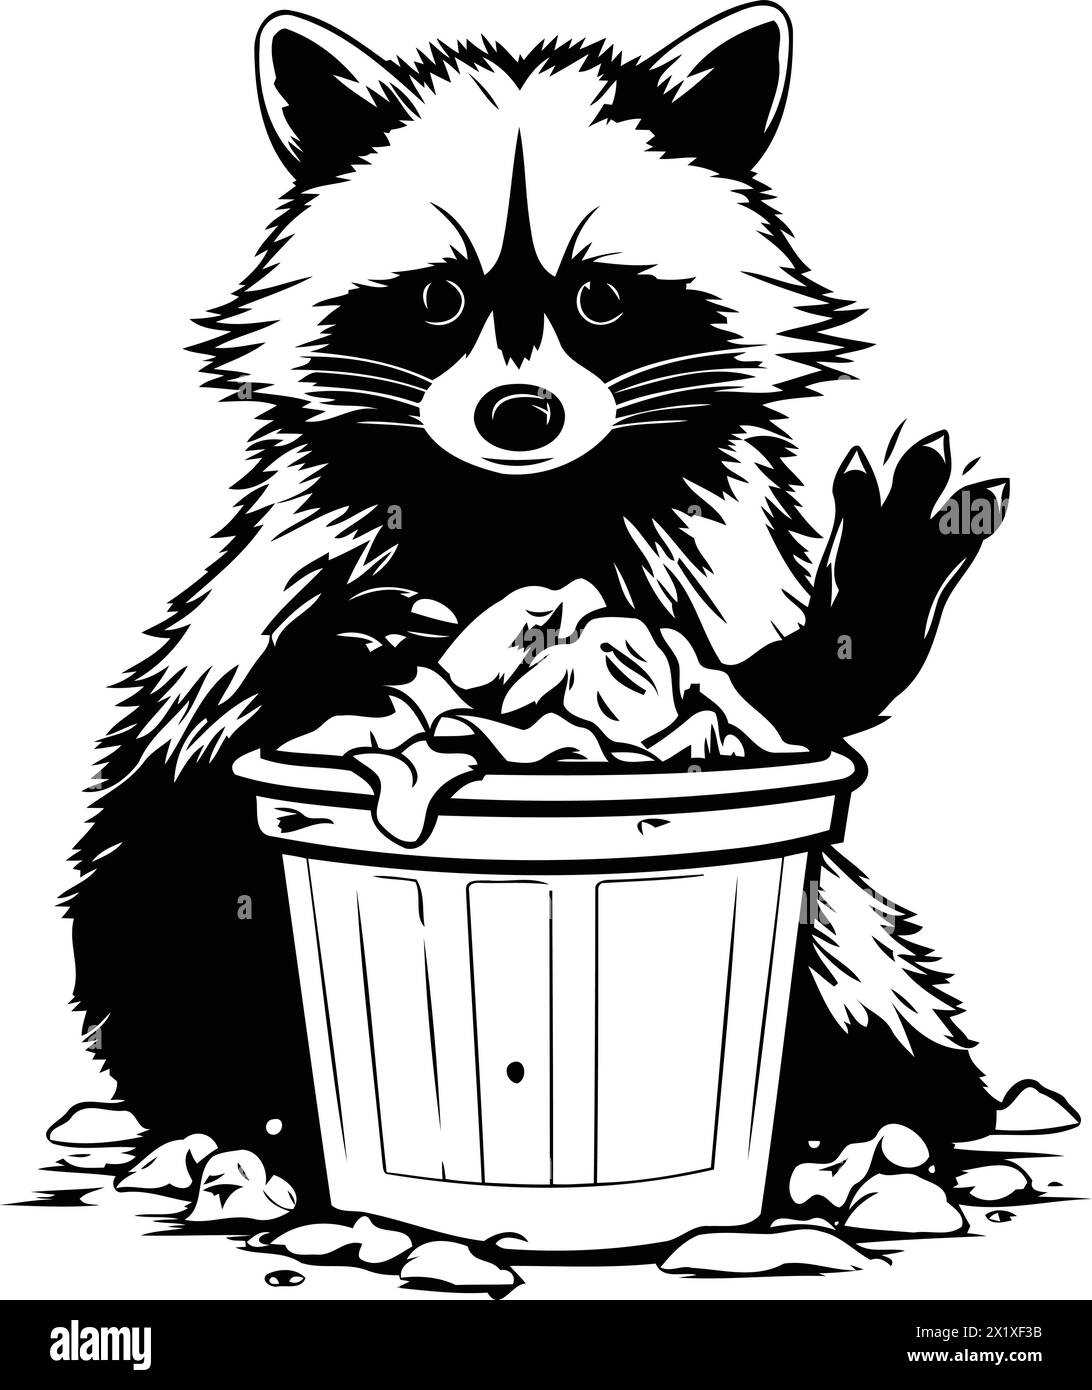 Raccoon in the trash can. Vector illustration on white background. Stock Vector